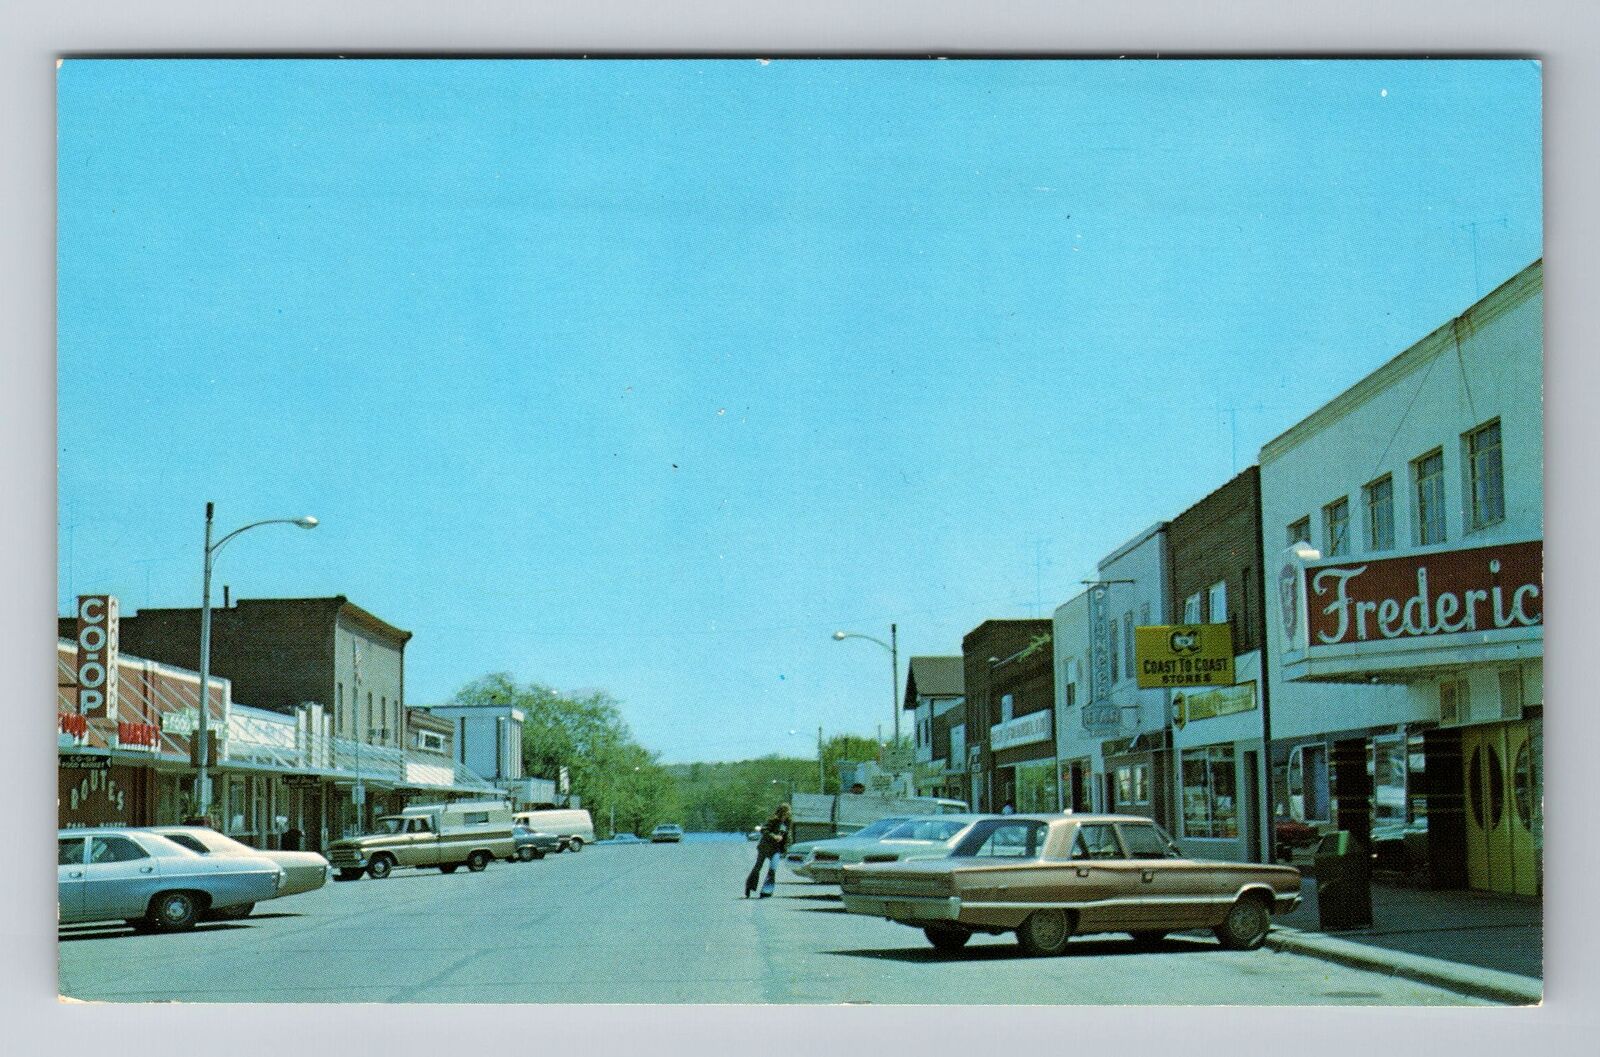 Frederic, WI-Wisconsin, Main Street Shops Classic Cars Antique, Vintage Postcard